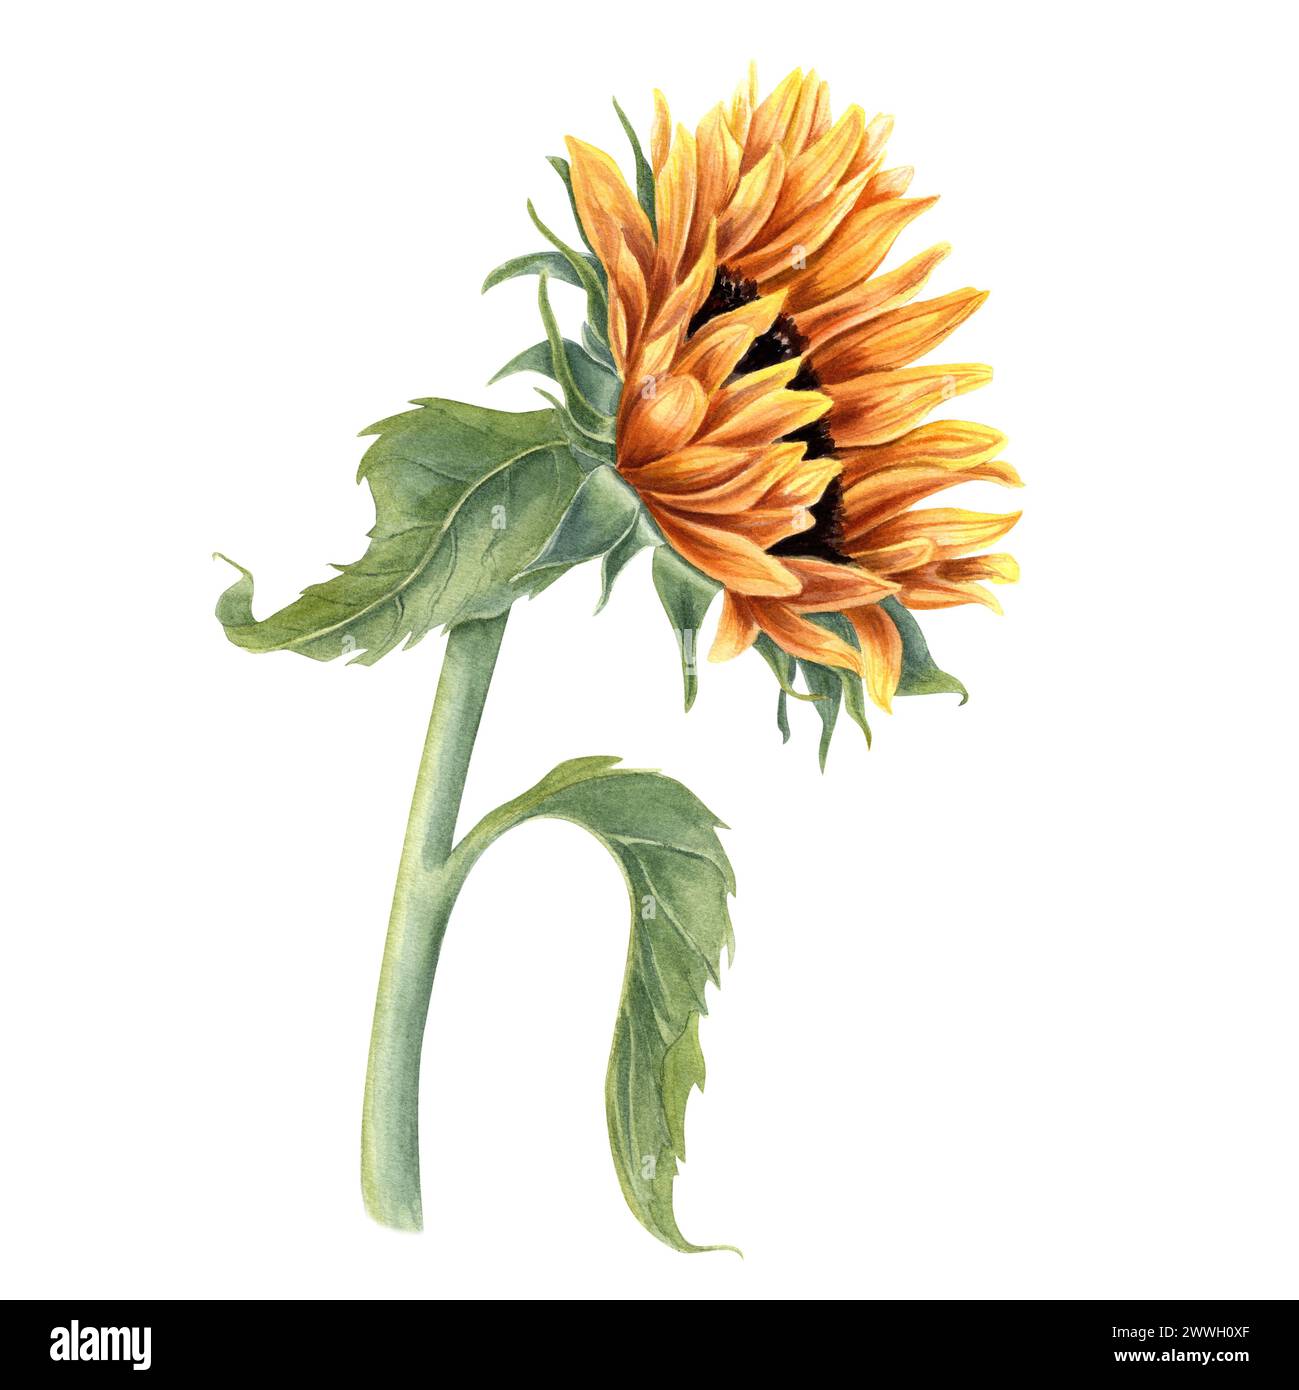 Single sunflower on stem. Field wild yellow flower. Flower head, leaf. Rustic style. Watercolor illustration. Side view. For cards, invitations Stock Photo